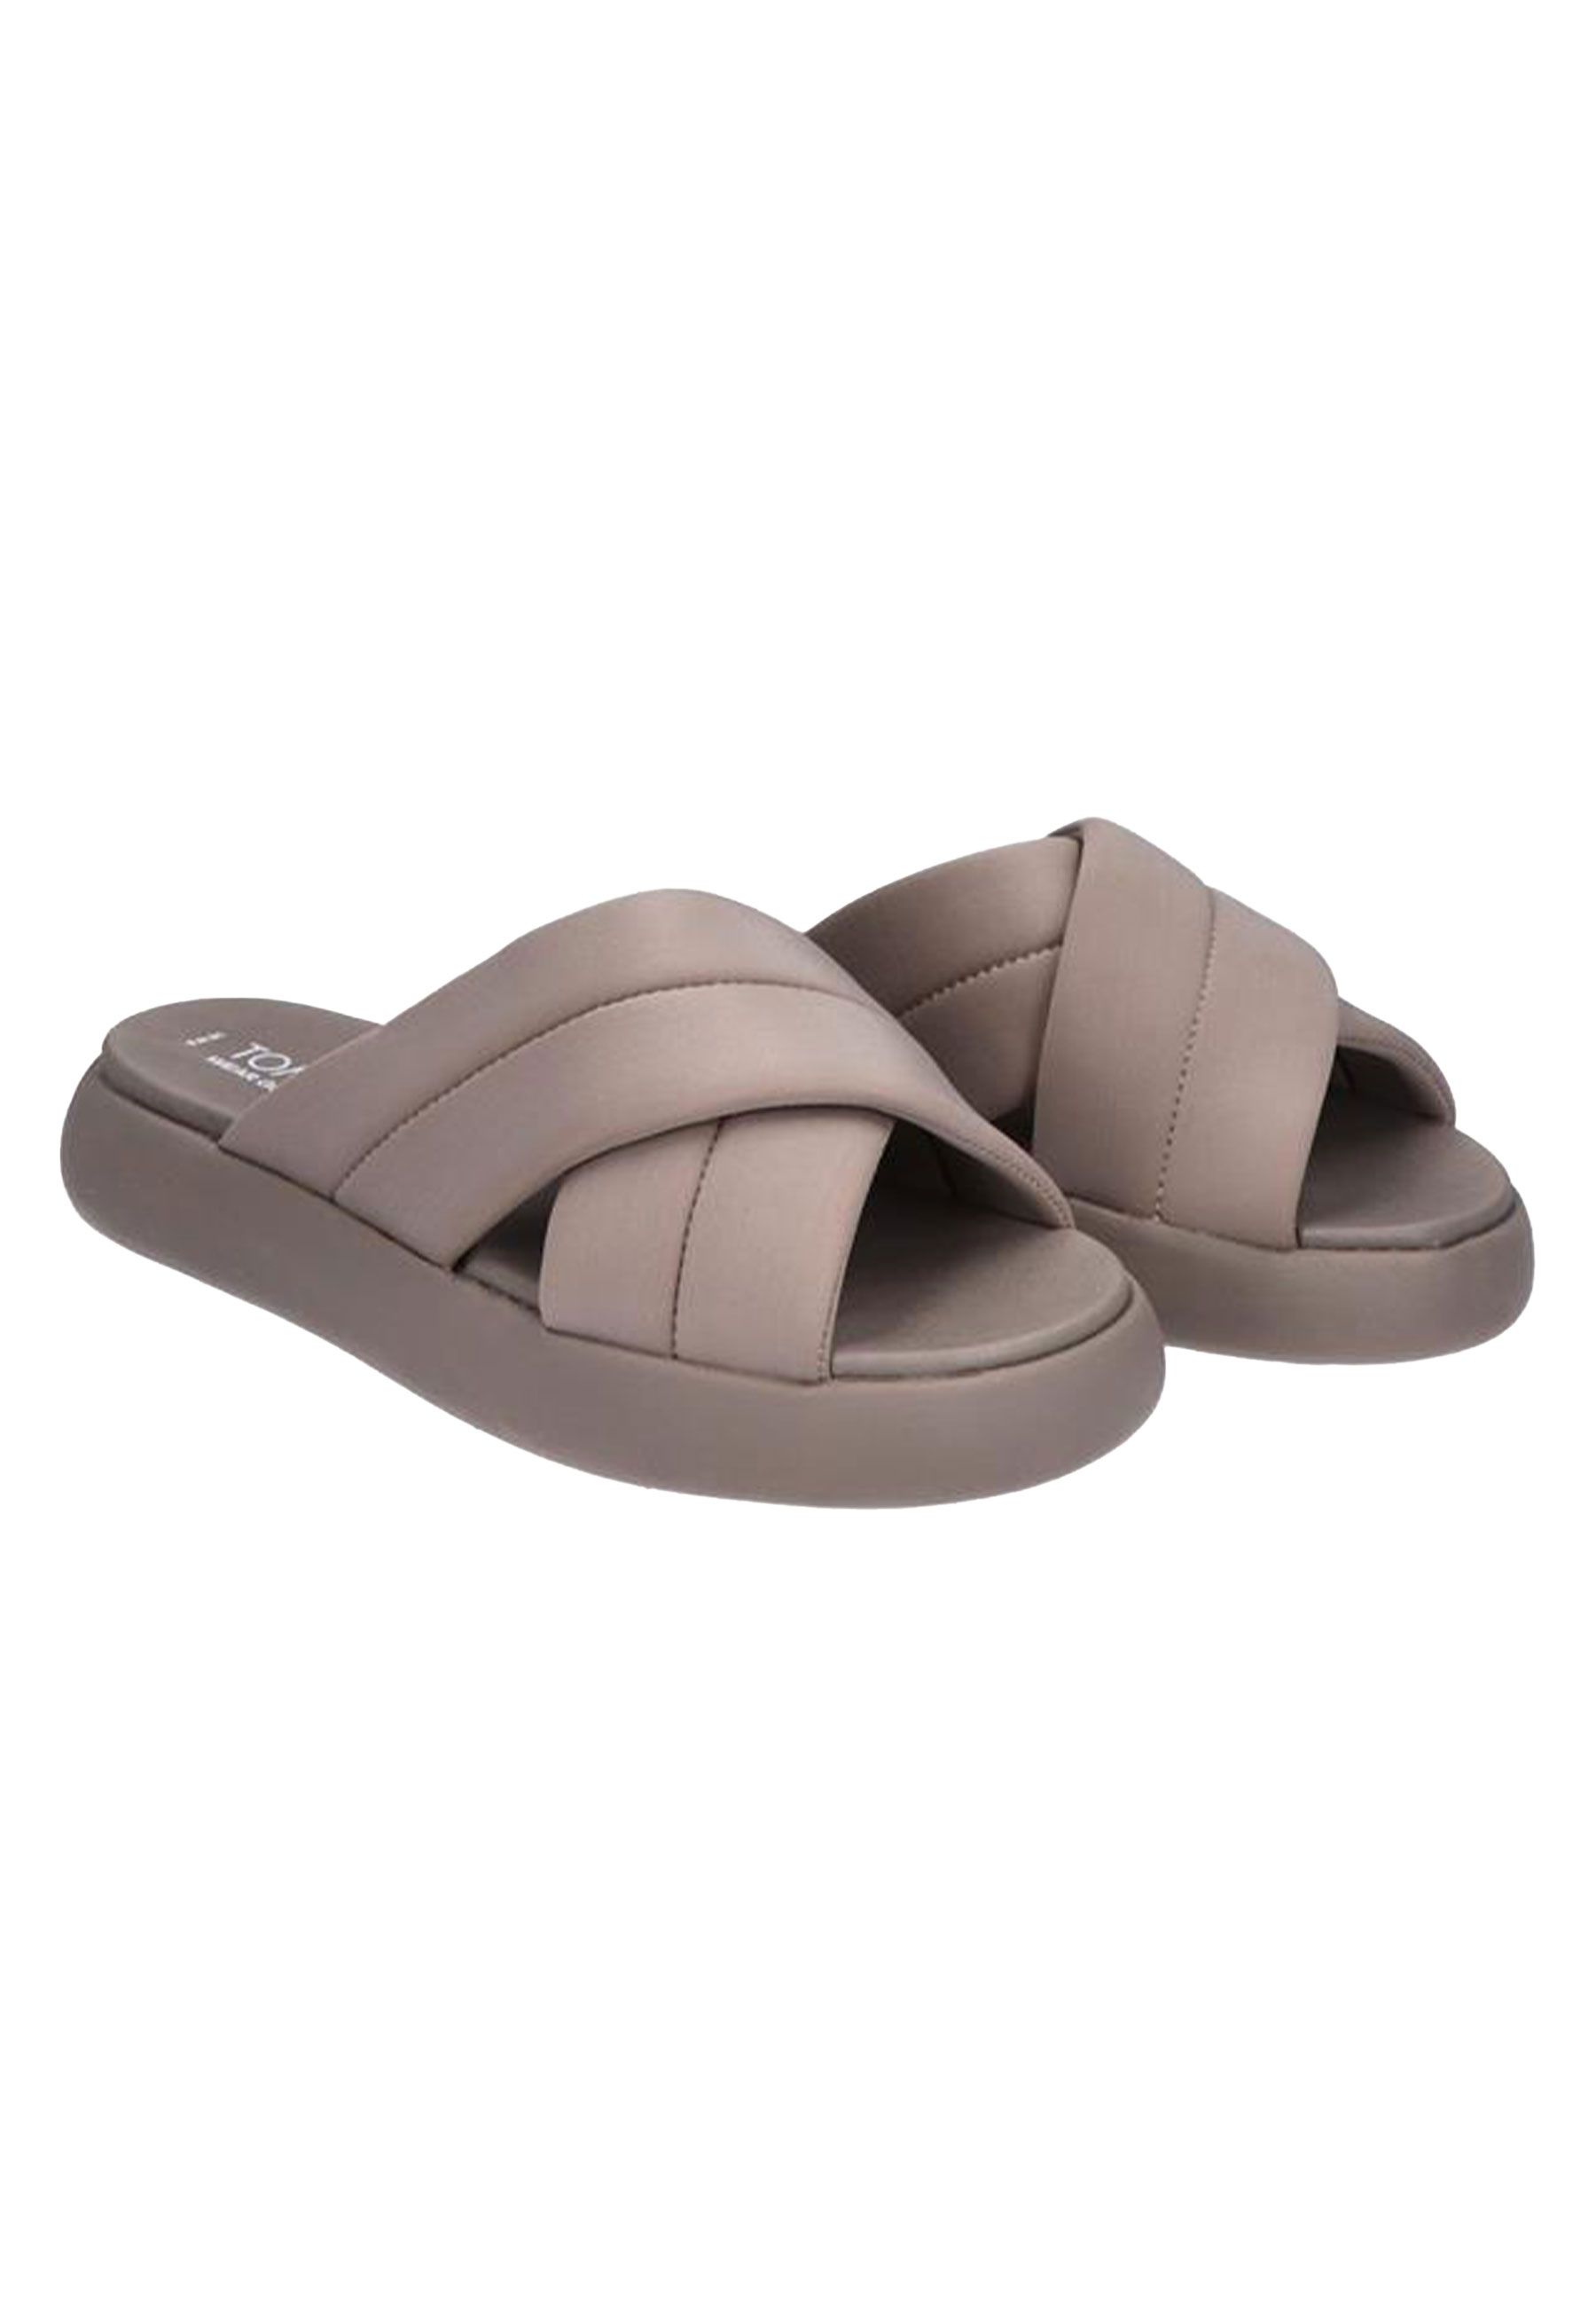 Alpargata Mallow Crossover Slippers Taupe Alpargata Mallow Crossover